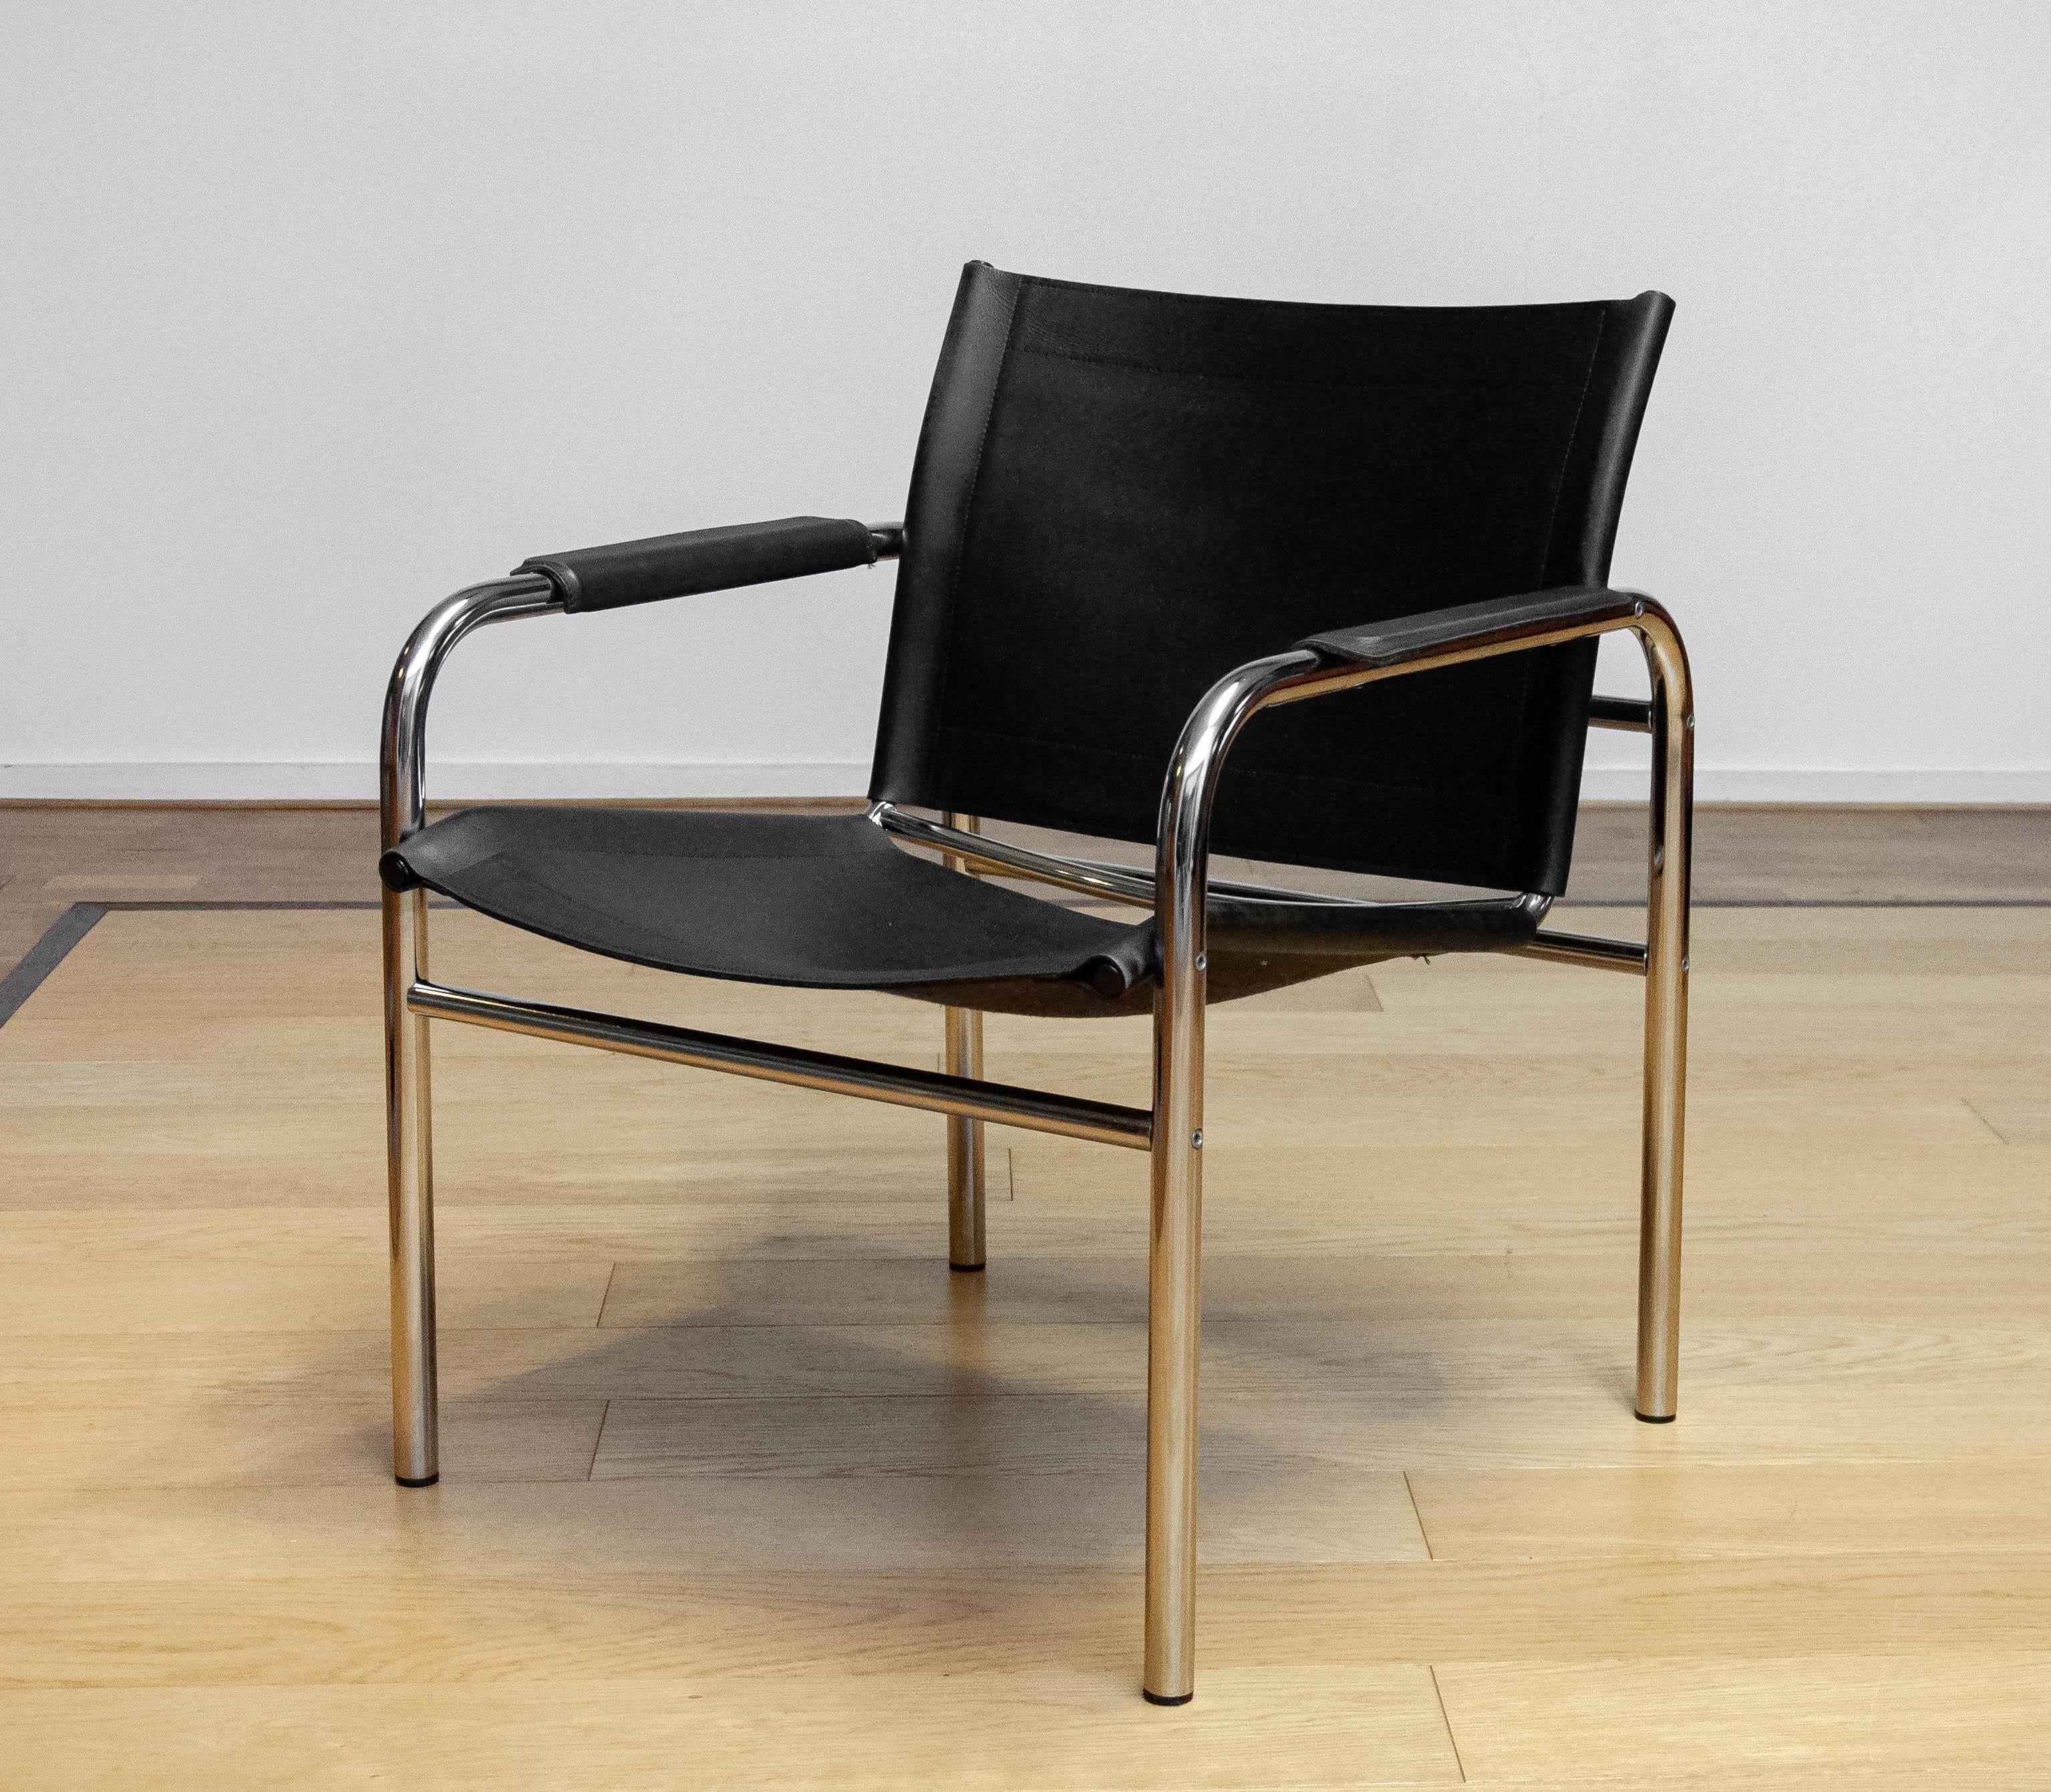 Scandinavian Modern 1970s Tubular Armchair Designed By Tord Bjorklund Upholstered With Black Leather For Sale